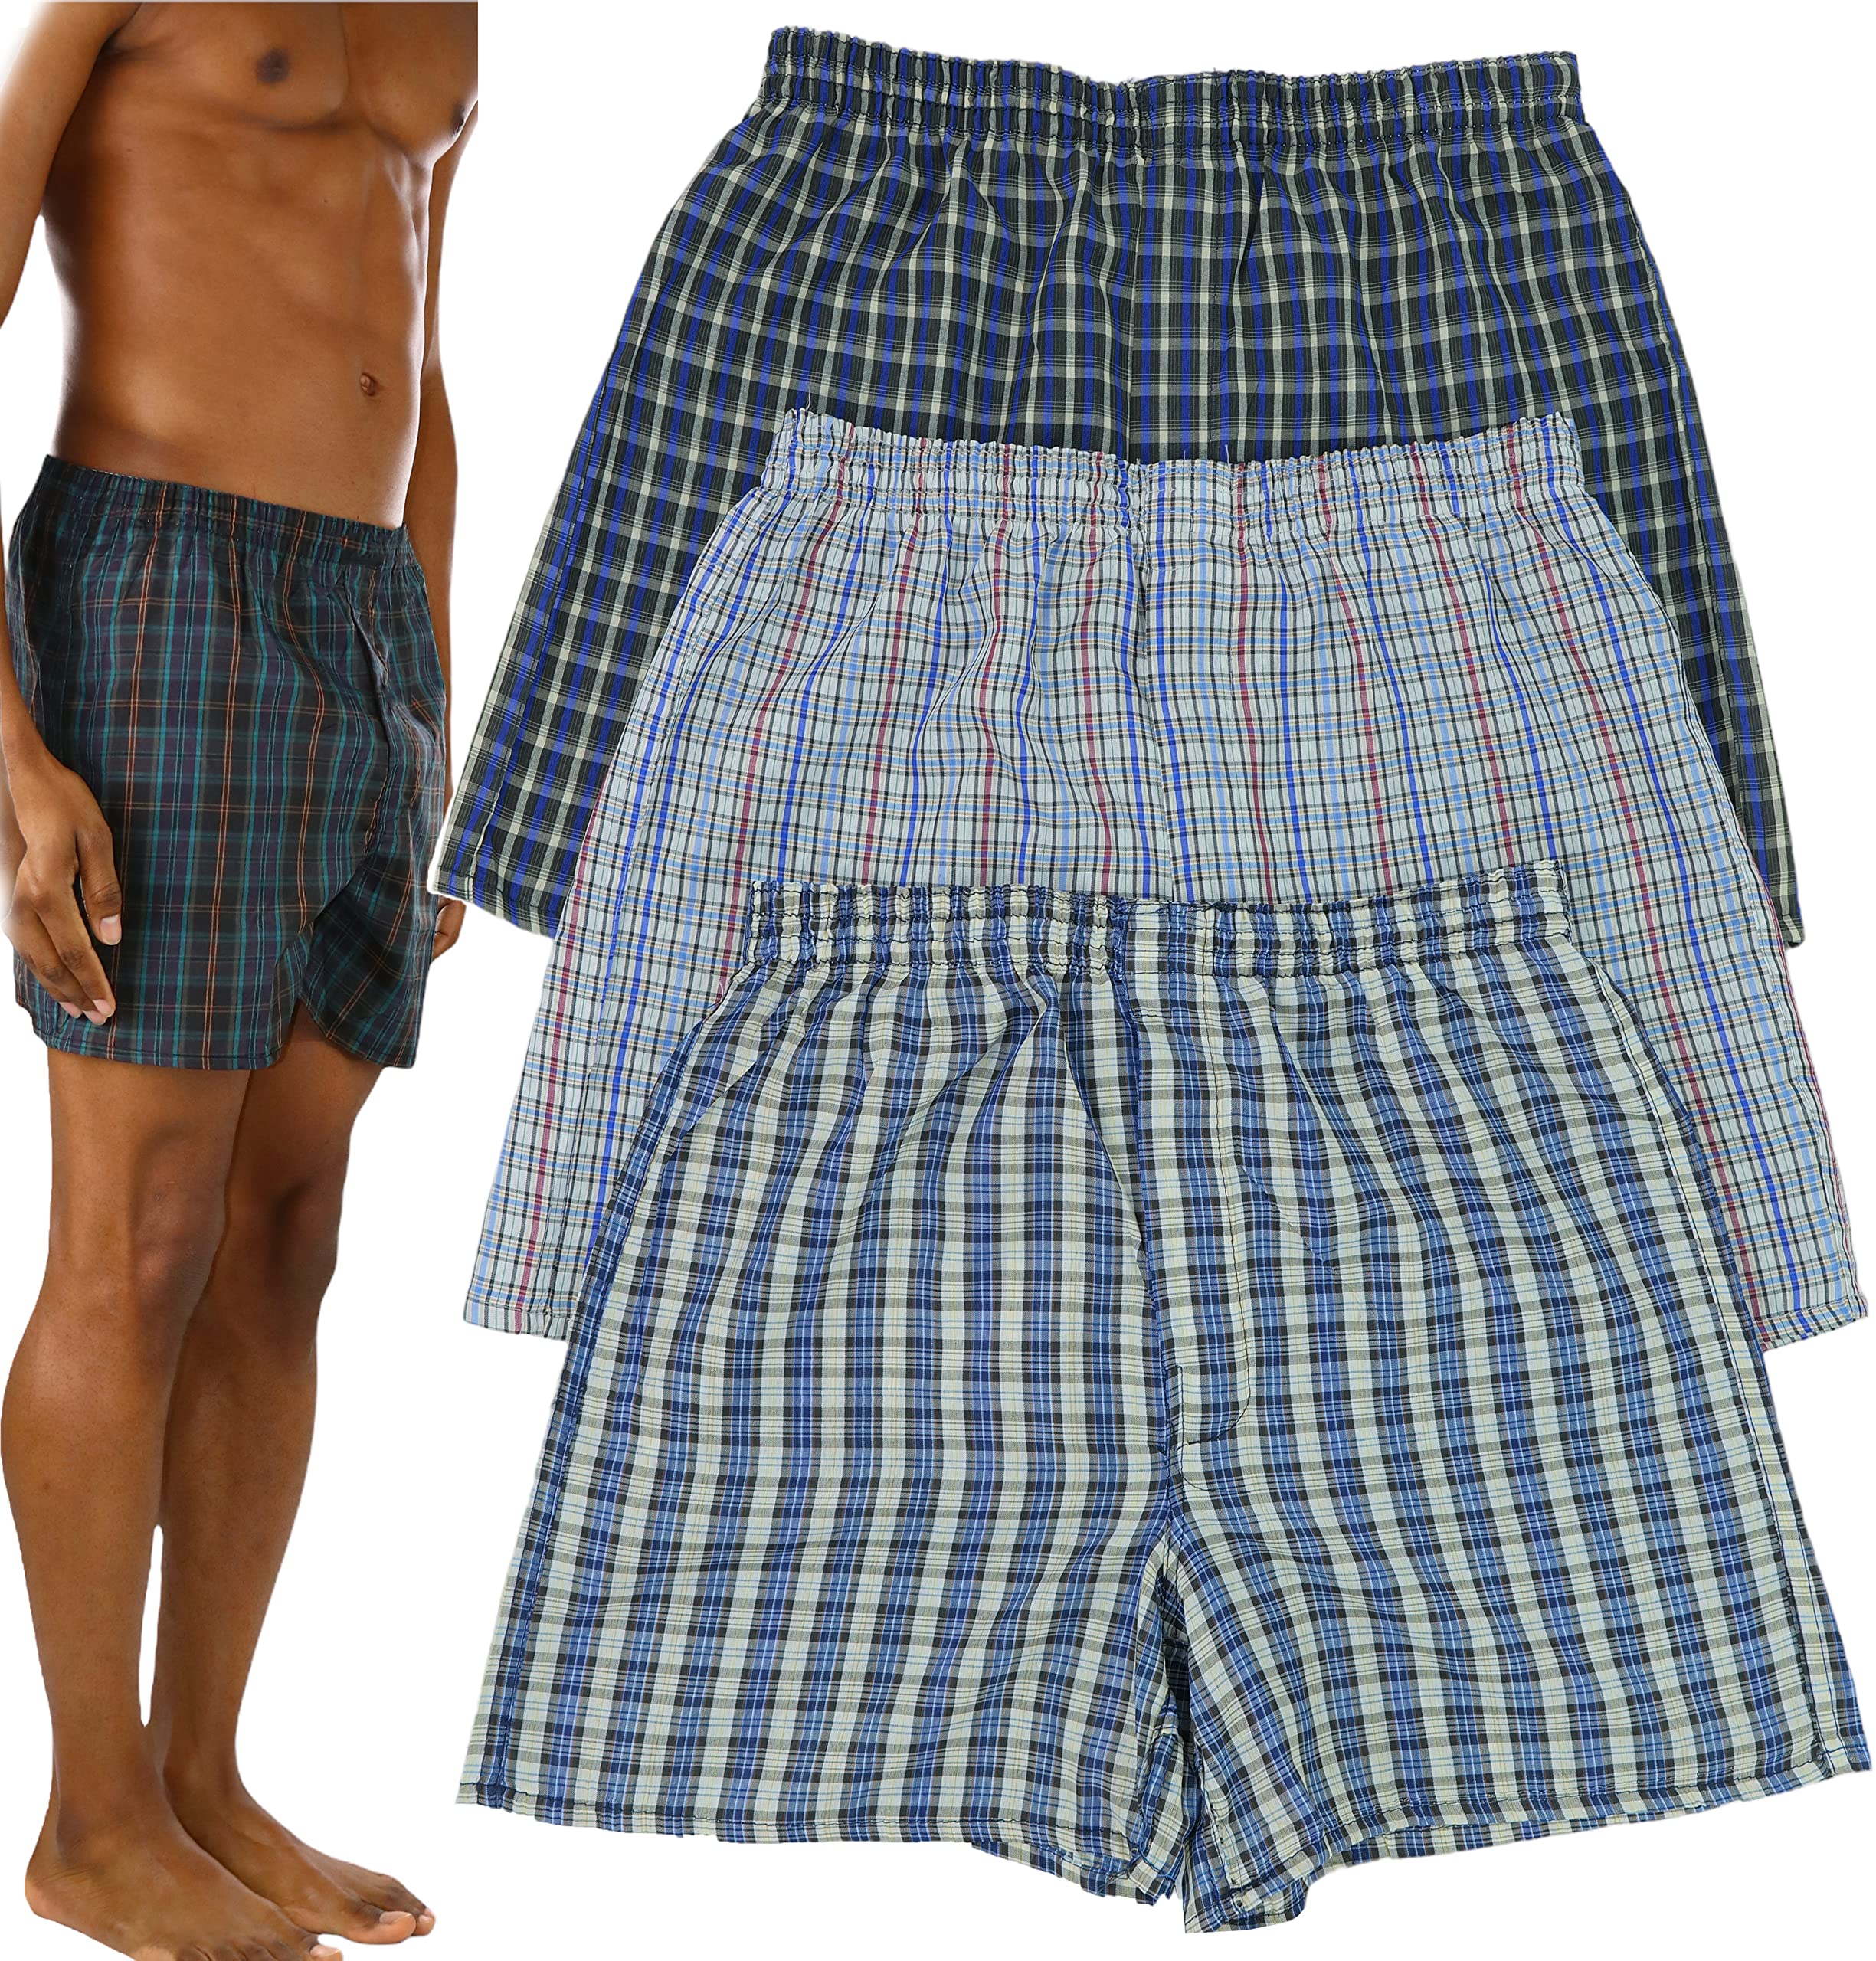 Men's boxer shorts, when it comes to choosing the right material for men's flat short pants, there are a few factors to consider.